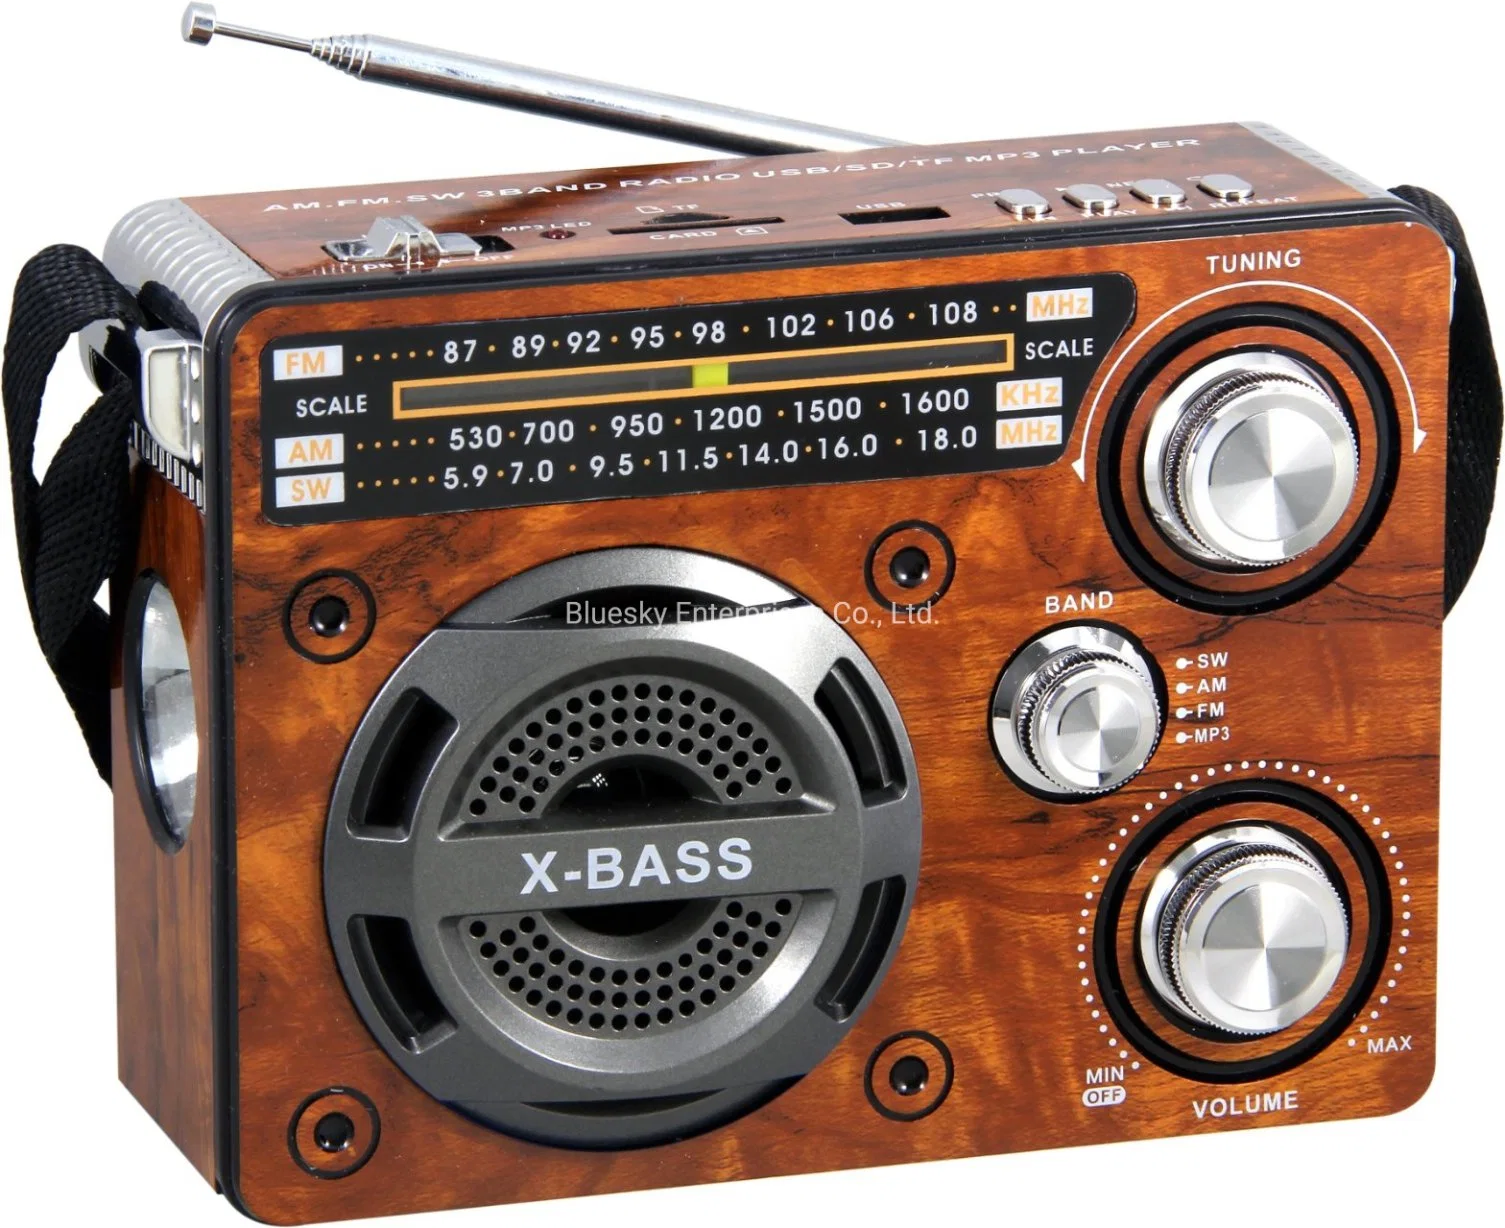 Tw 249LED Newest Arrival Built-in Powerful FM/Am/Sw 3band Radio with LED Light USB TF MP3 Music Player FM Radio